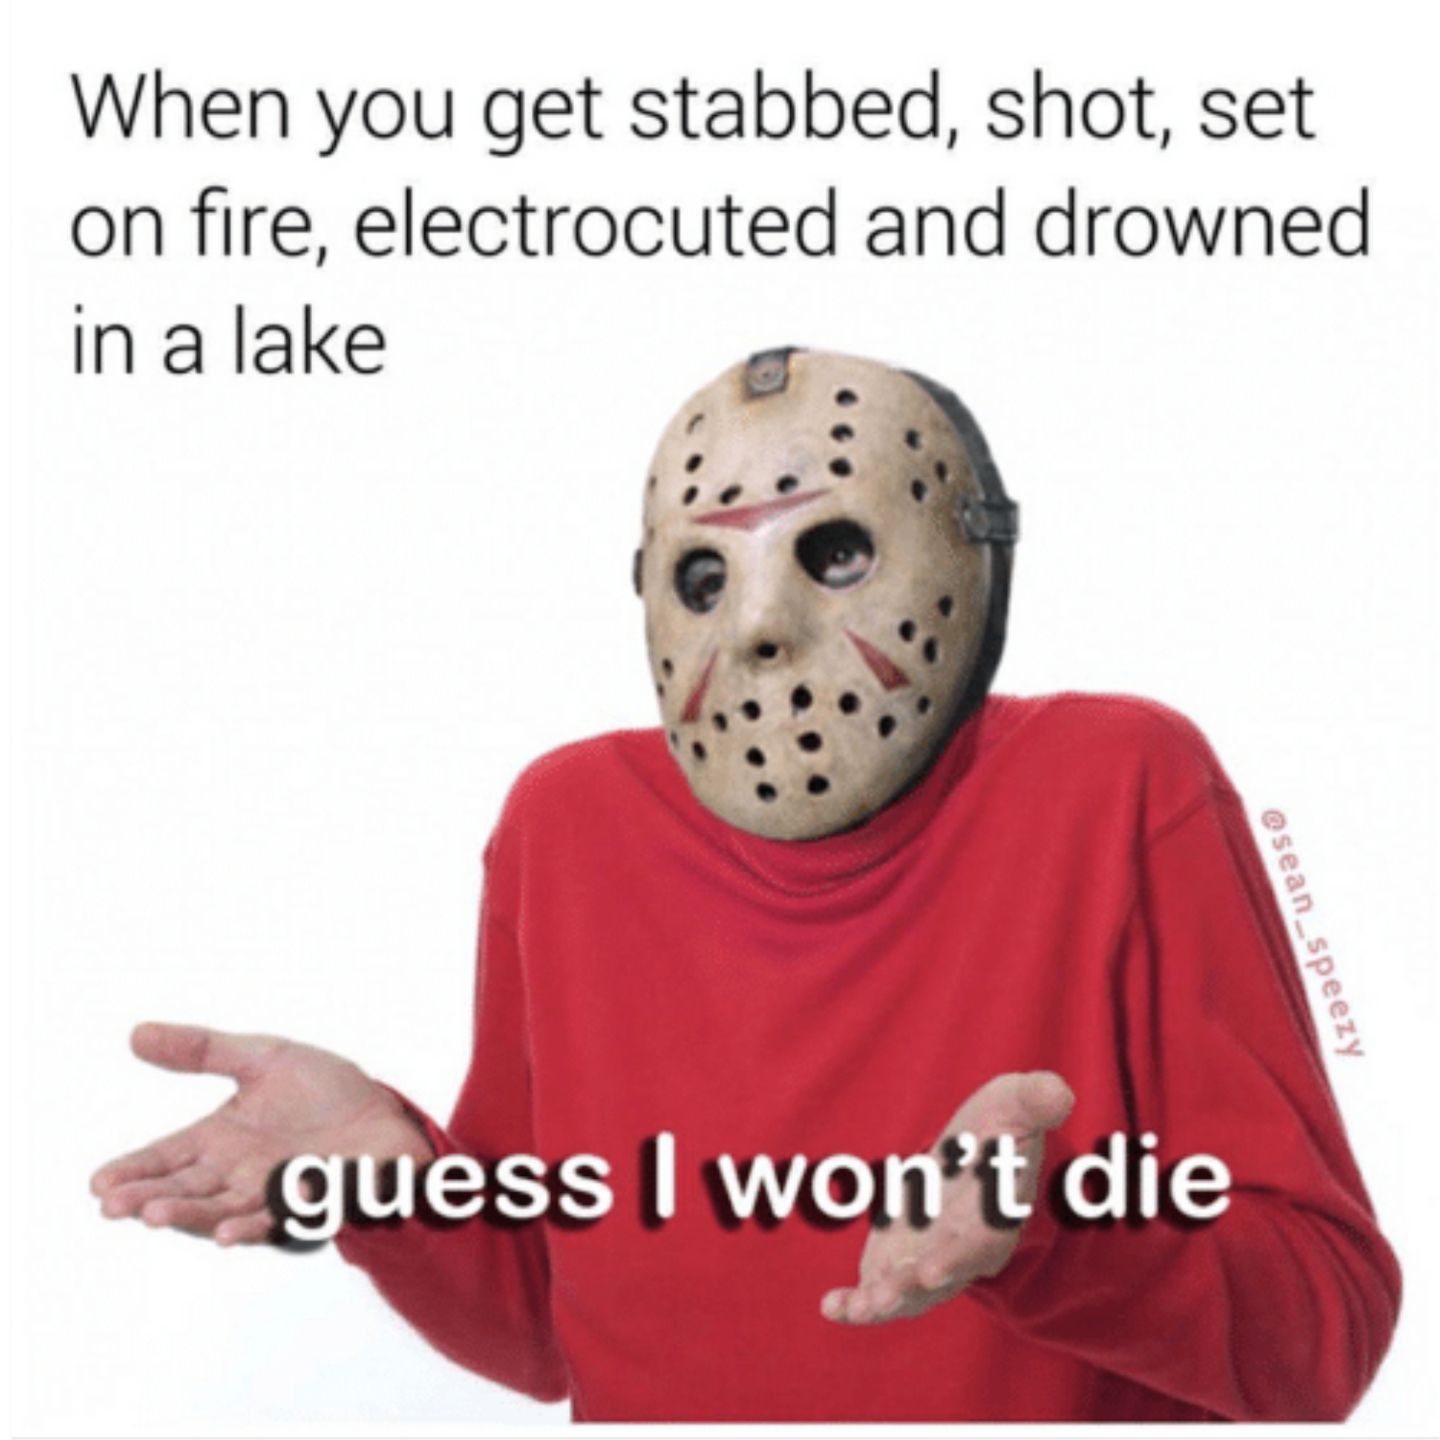 Meme about Jason's immortality in Friday the 13th. 